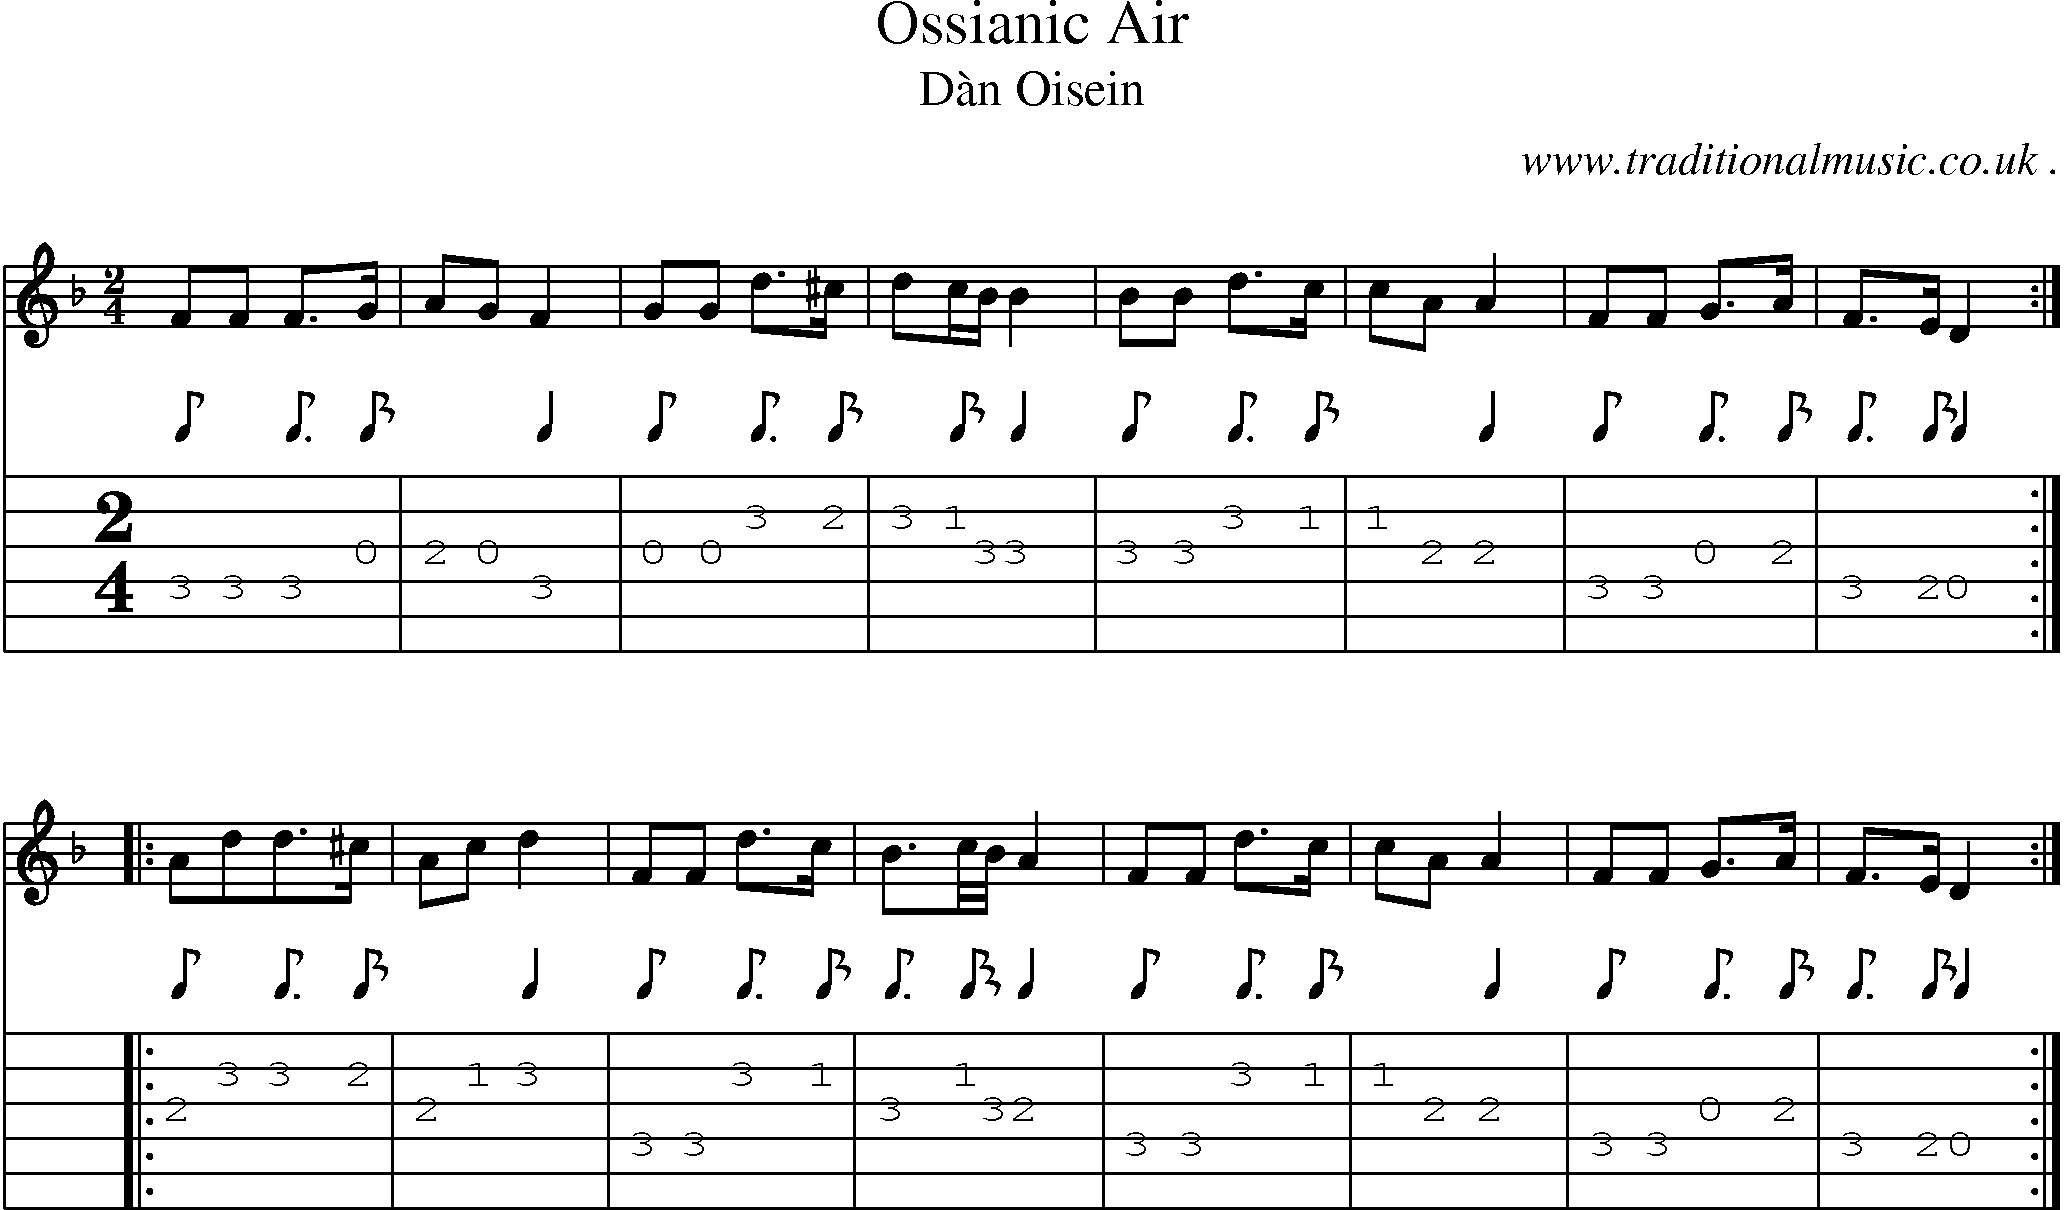 Sheet-music  score, Chords and Guitar Tabs for Ossianic Air